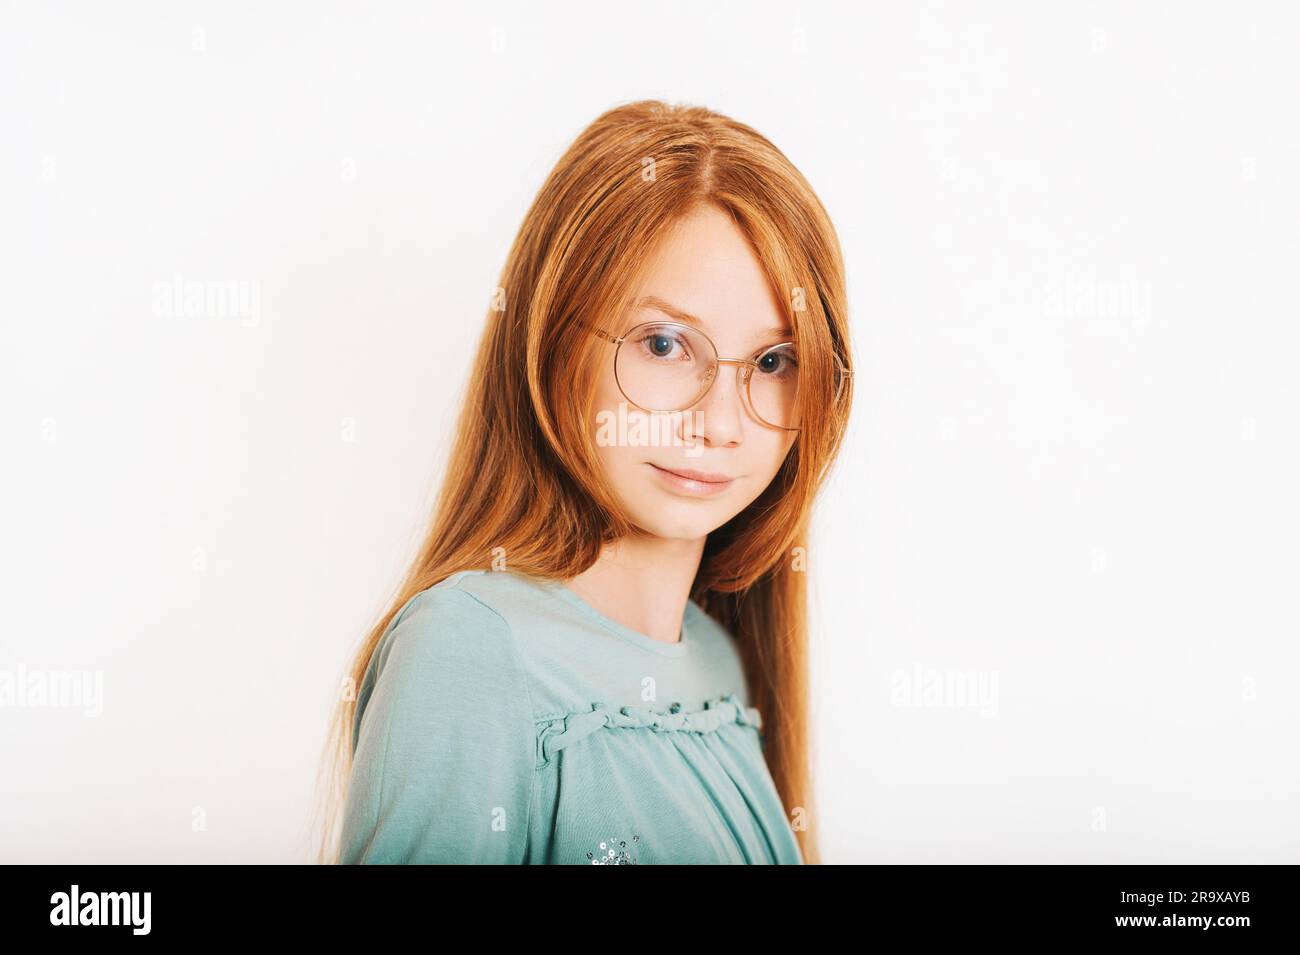 Studio shot of young preteen red-haired girl against white background, wearing eyeglasses Stock Photo